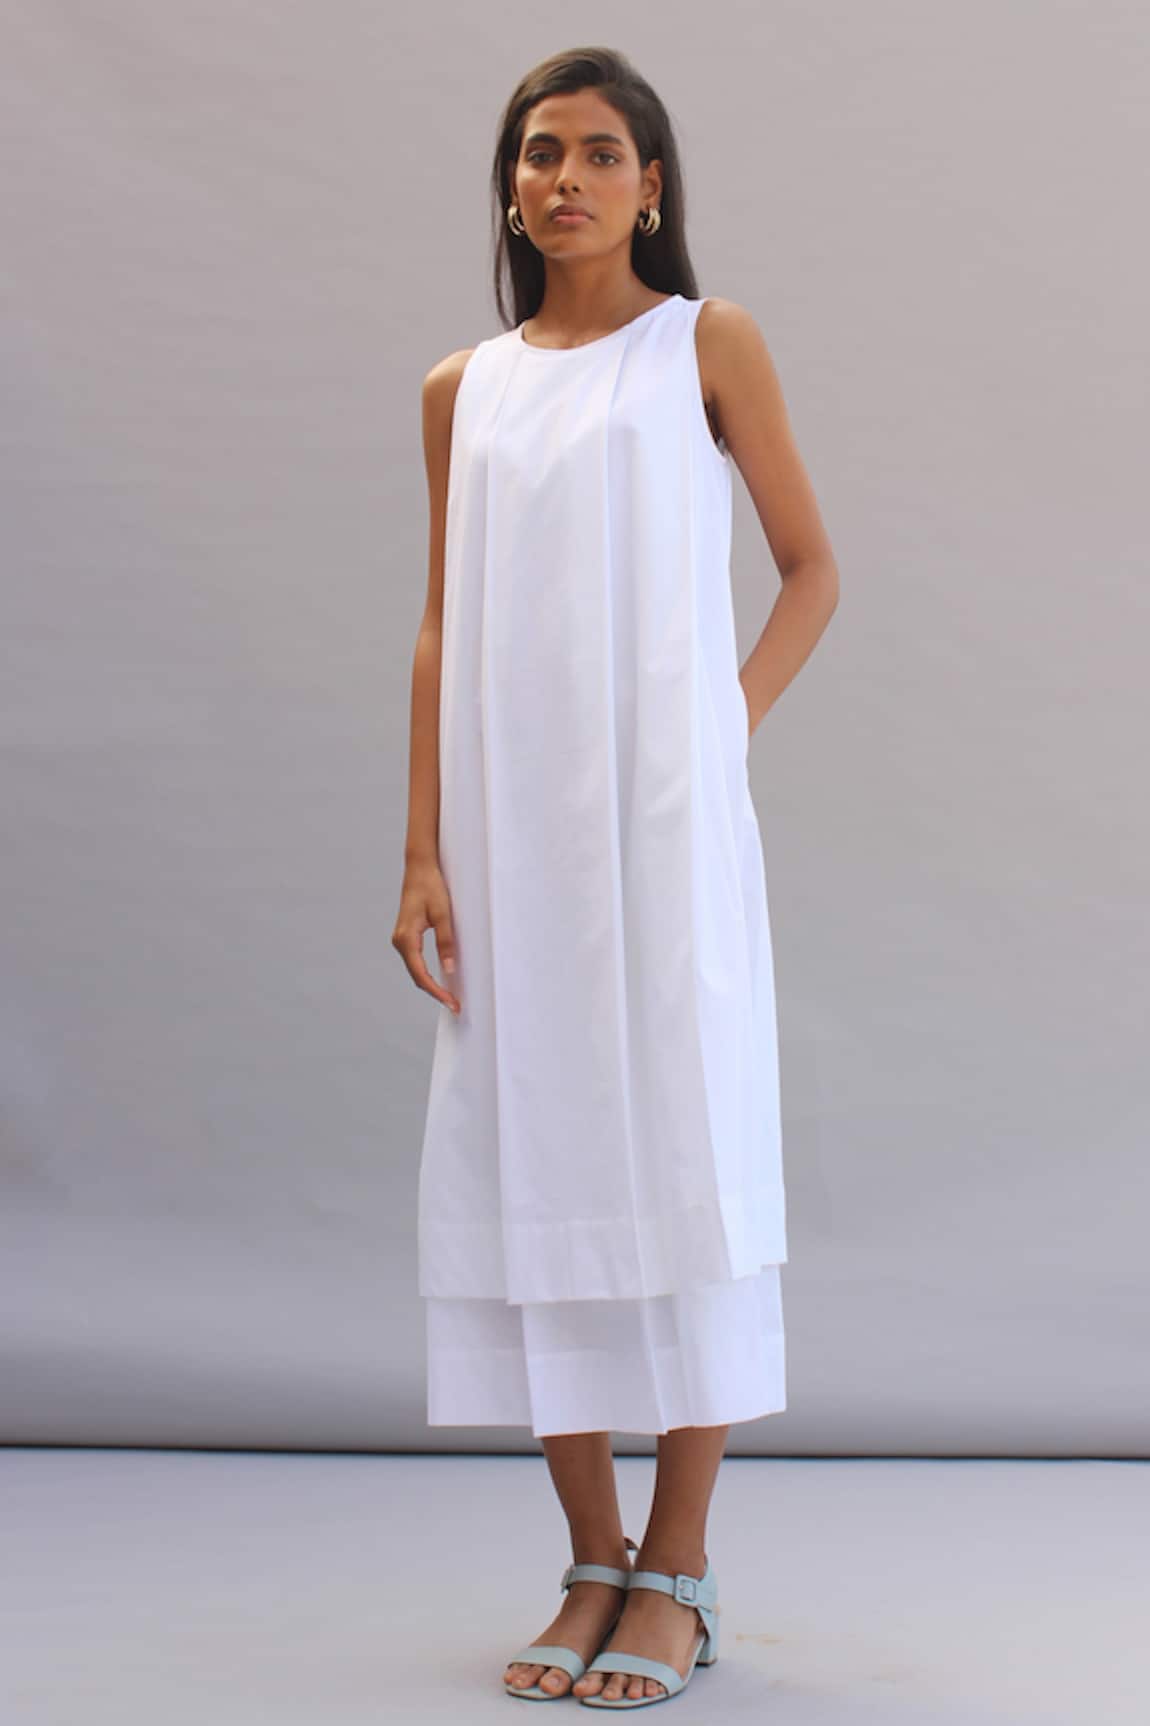 The Summer House Sylvia Cotton Layered Dress